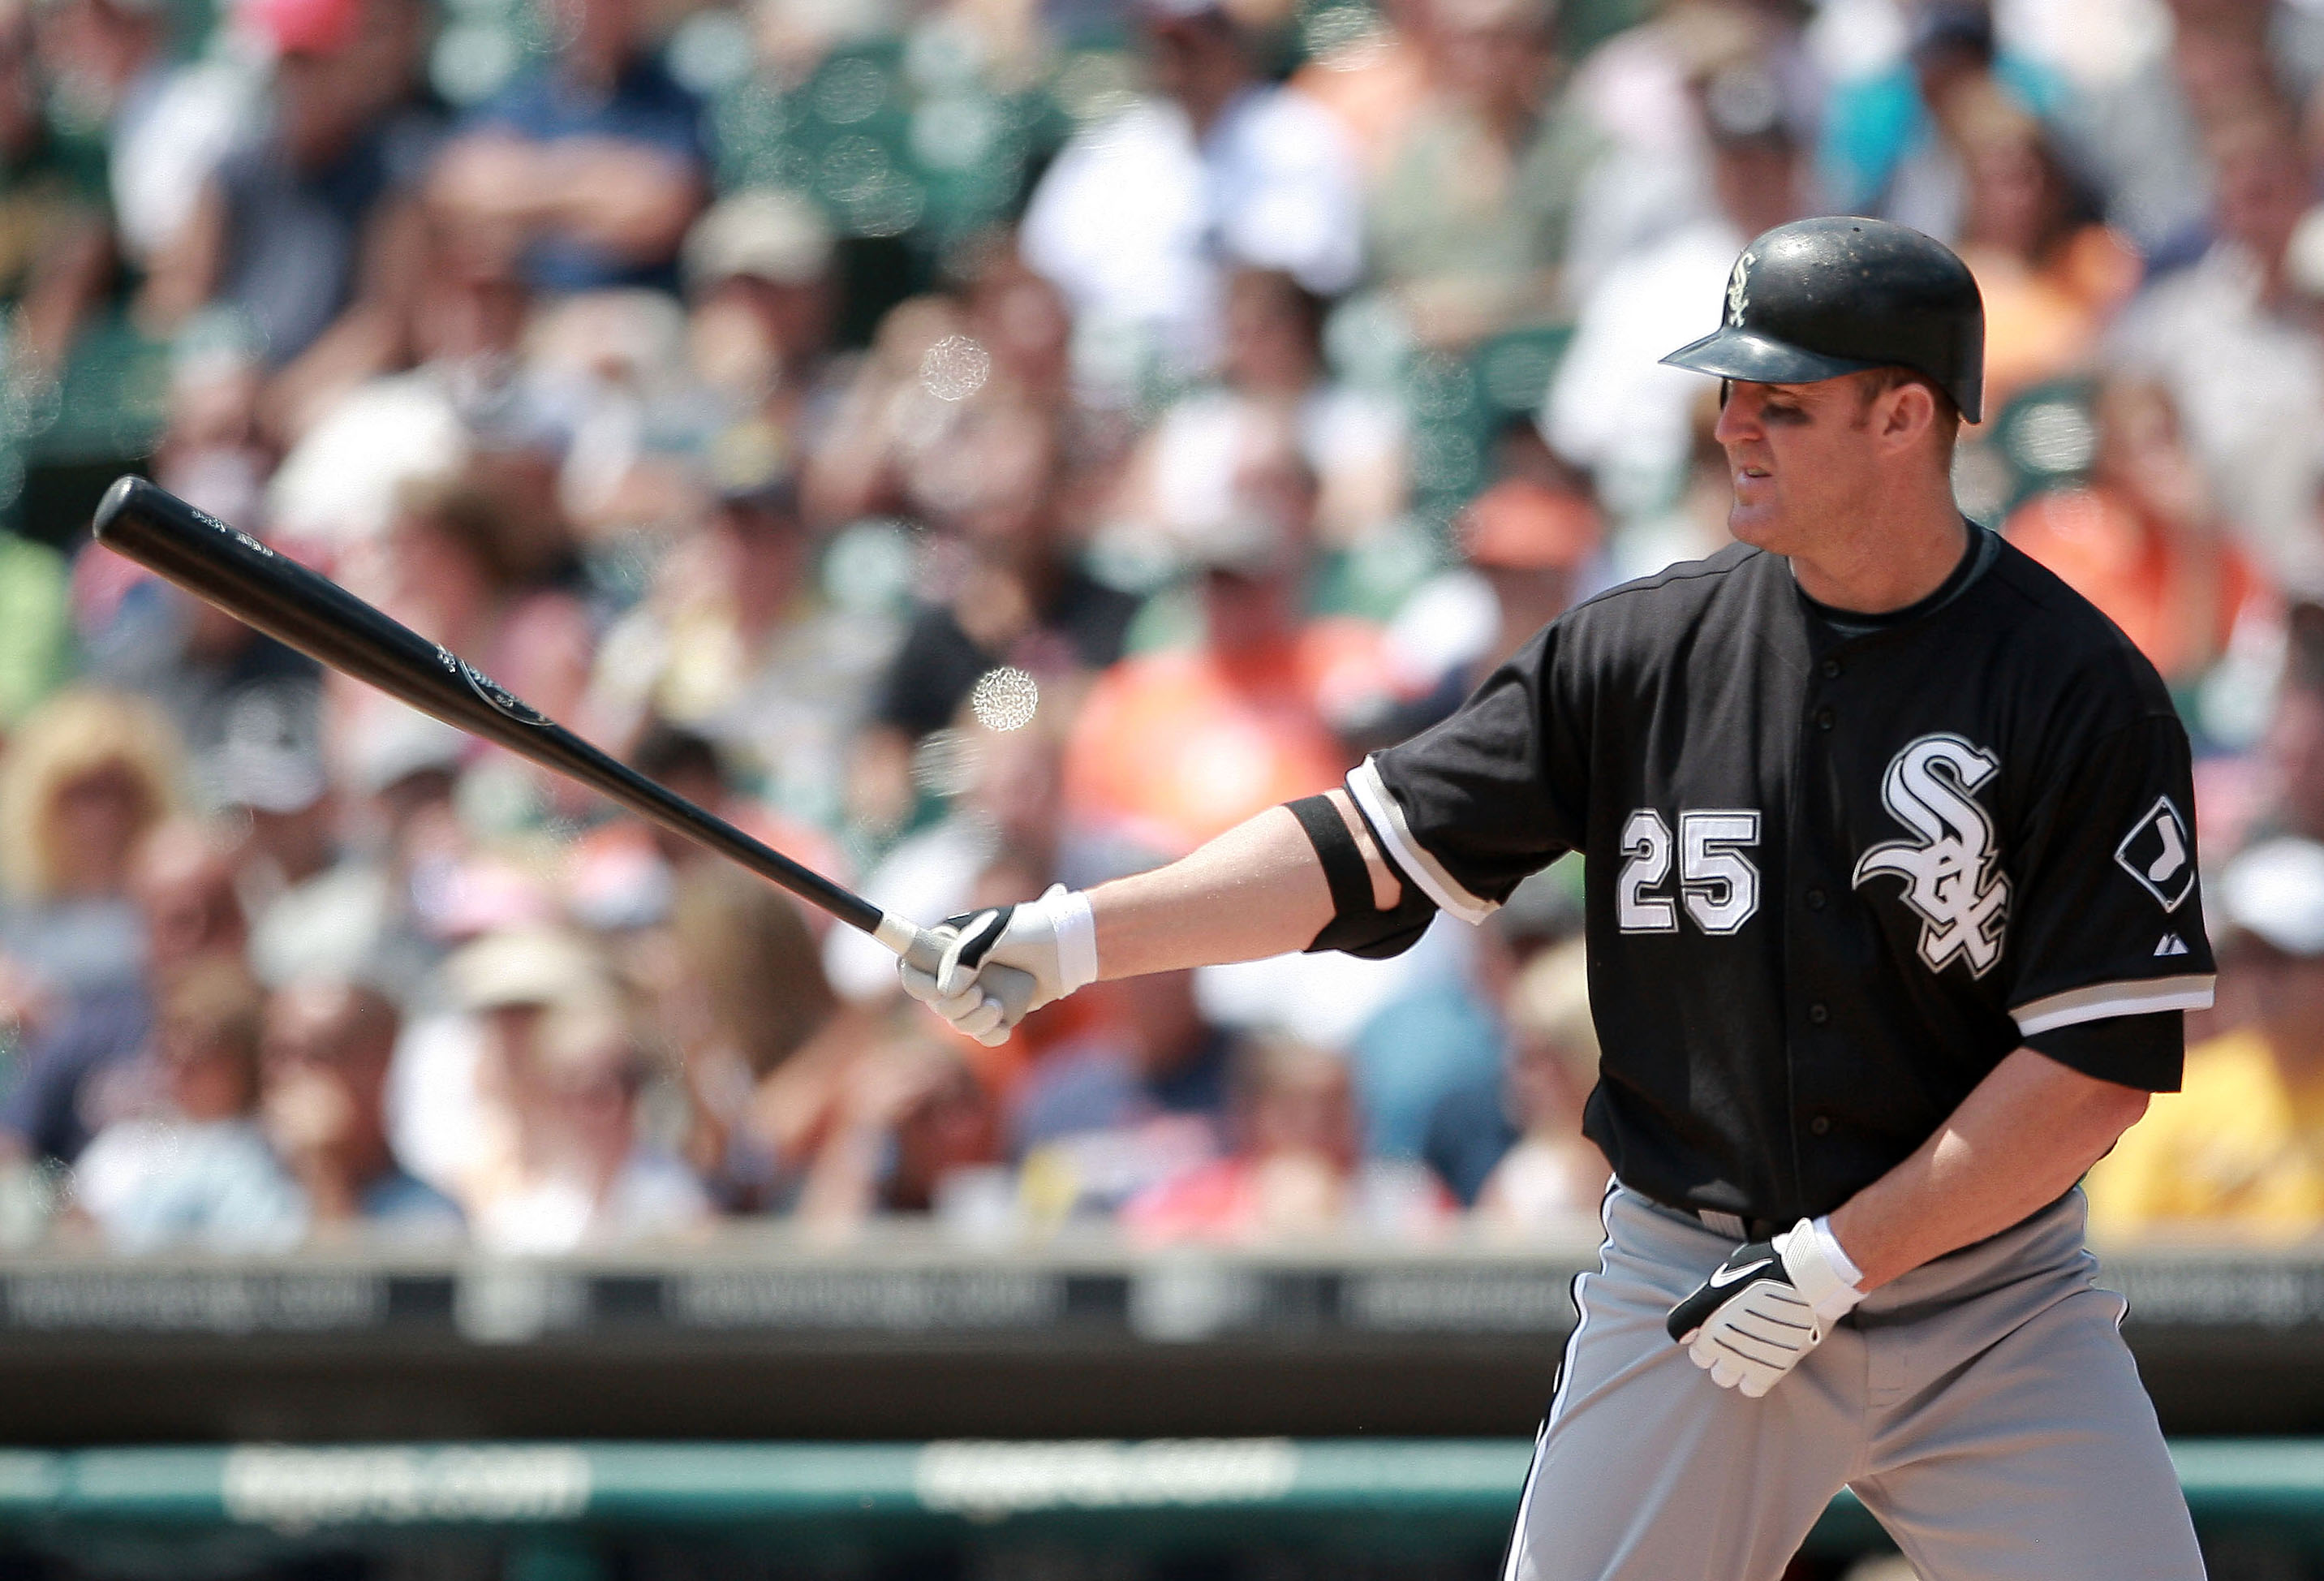 Chicago White Sox designated hitter Jim Thome rounds the bases for